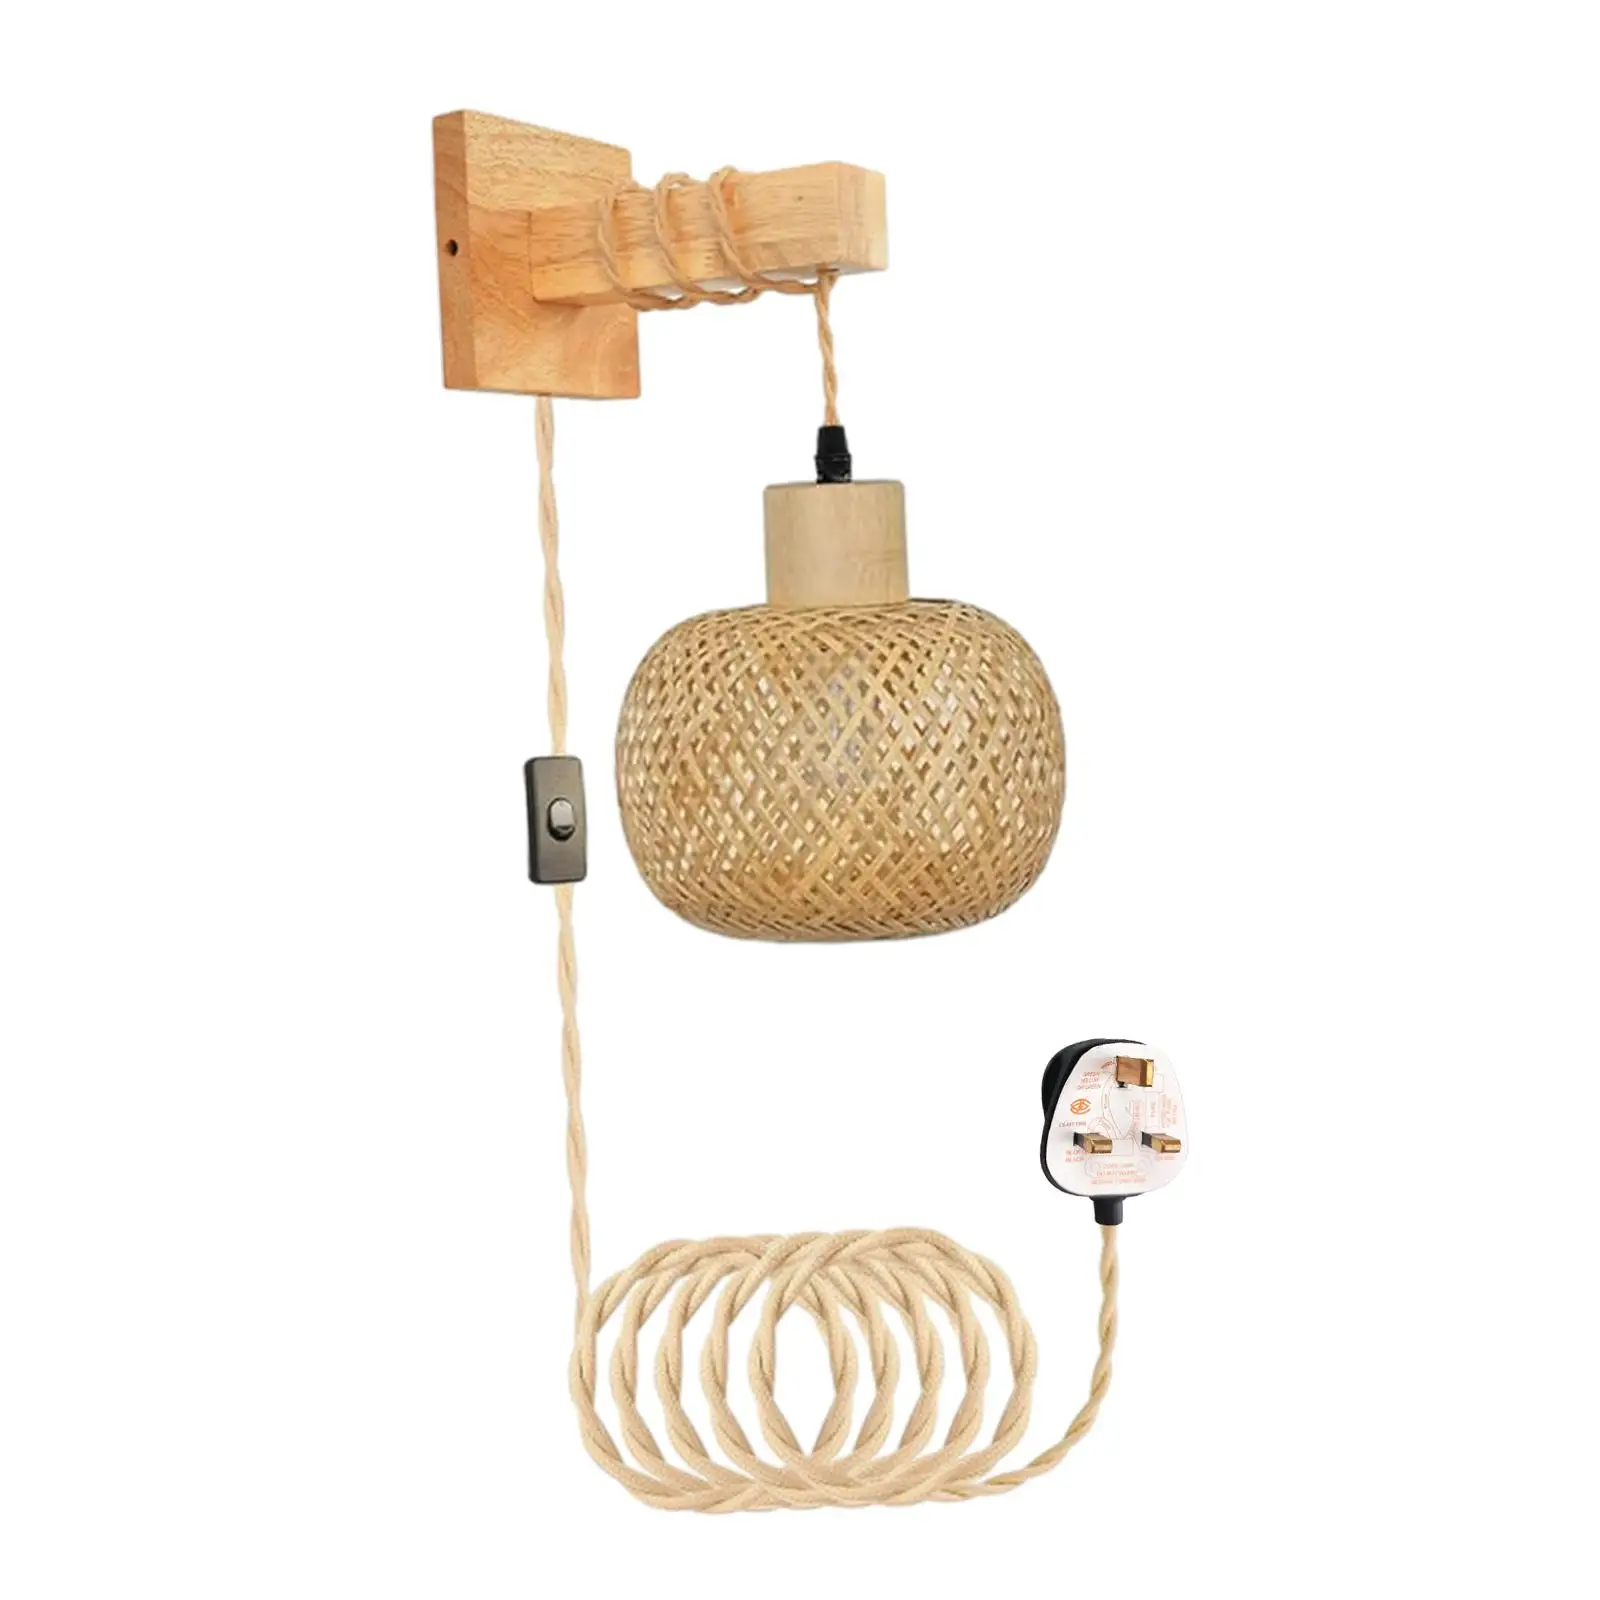 Wall Sconce E26 Base Hand Woven Boho Decor Bedside Light Fixture Plug in Pendant Light for Reading Kitchen Stairs Home Corridor